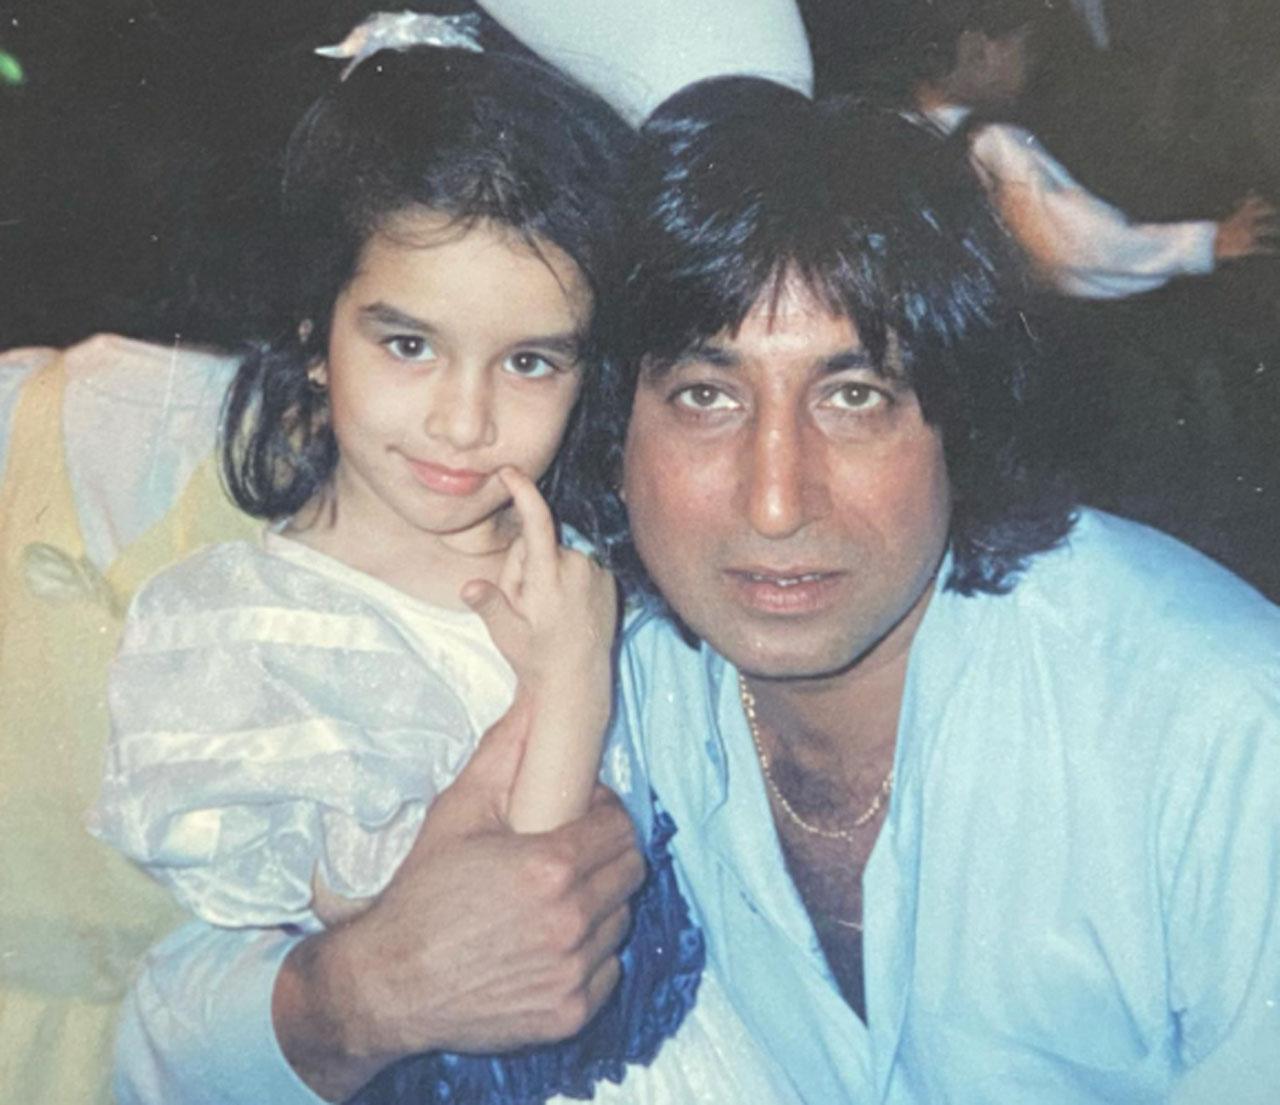 To wish her father Shakti Kapoor on Father's Day, Shraddha wrote- 